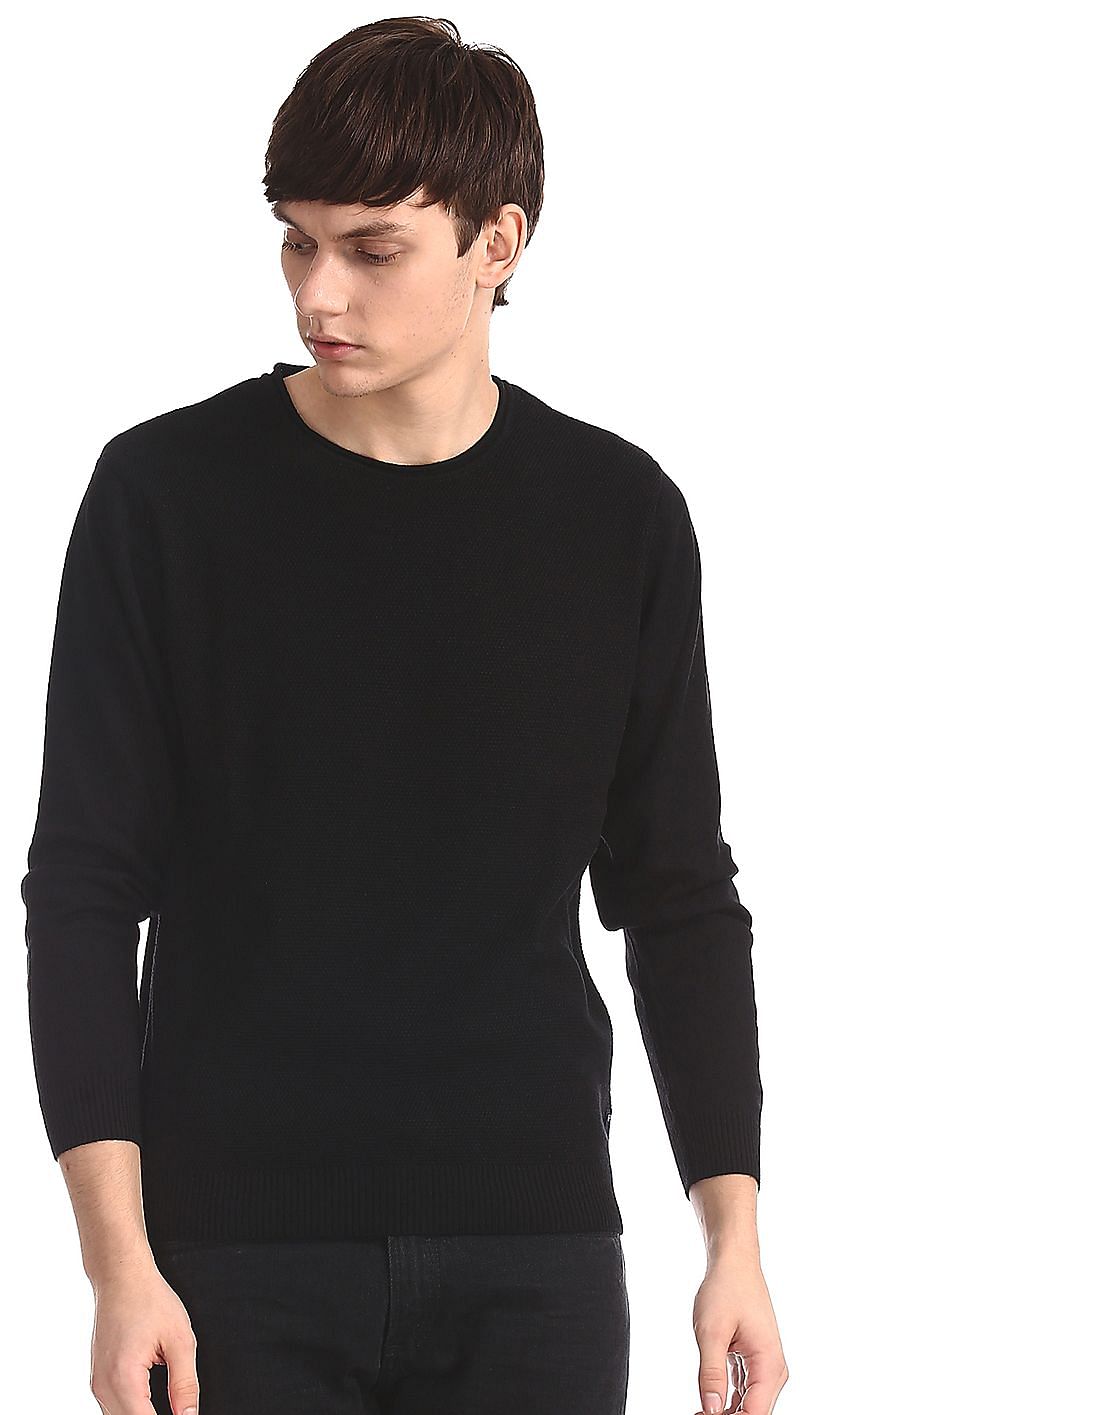 Buy Men Black Round Neck Patterned Knit Sweater online at NNNOW.com